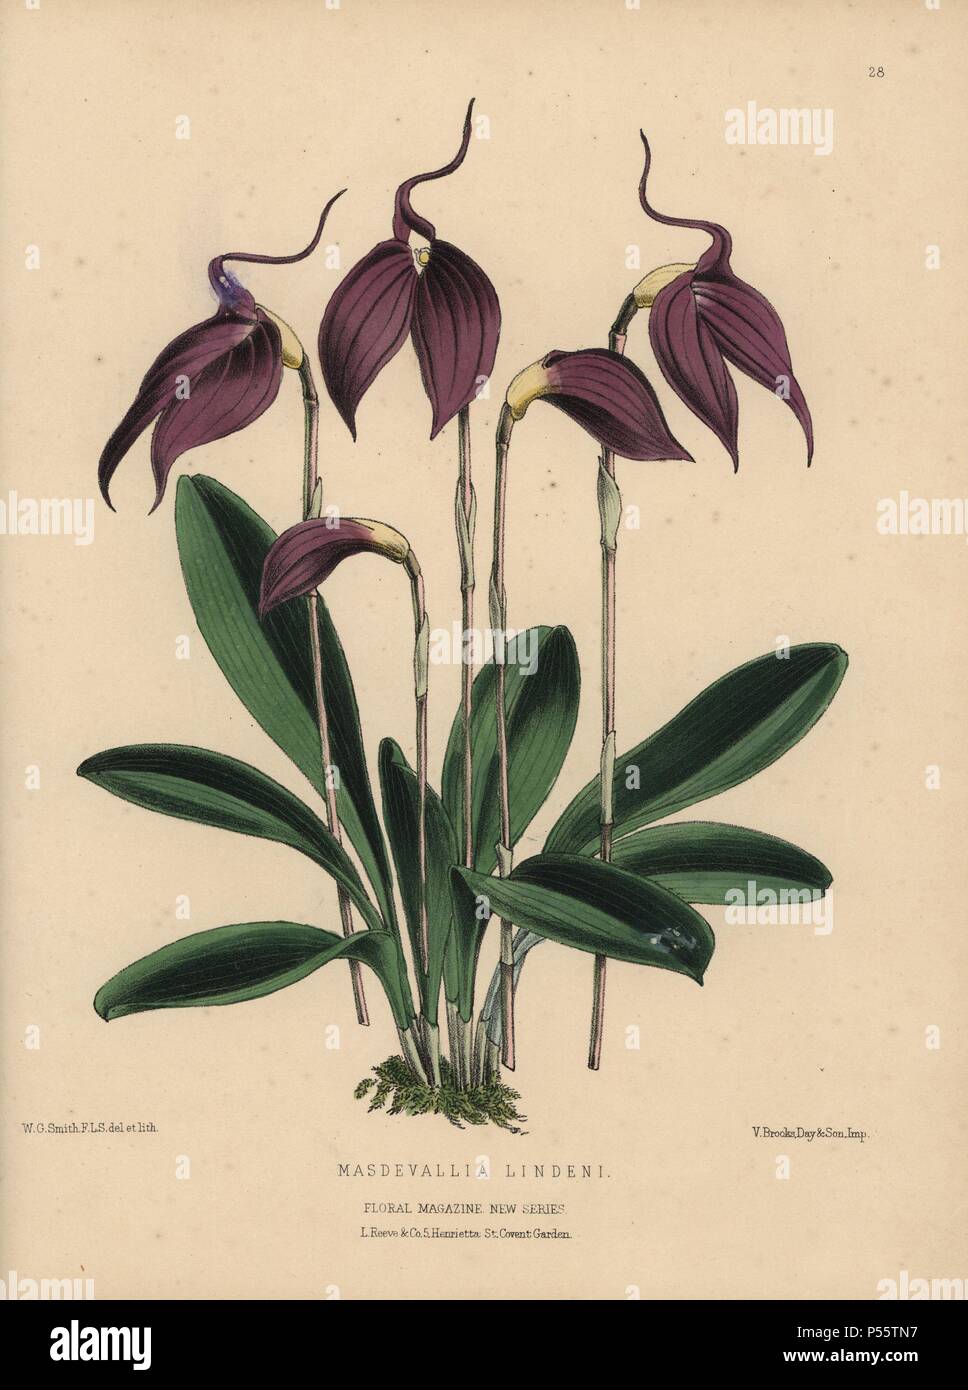 Purple masdevallia orchid. Masdevallia lindeni. Handcolored botanical drawn and lithographed by W.G. Smith from H.H. Dombrain's 'Floral Magazine' 1872.. Worthington G. Smith (1835-1917), architect, engraver and mycologist. Smith also illustrated 'The Gardener's Chronicle.' Henry Honywood Dombrain (1818-1905), clergyman gardener, was editor of the 'Floral Magazine' from 1862 to 1873. Stock Photo